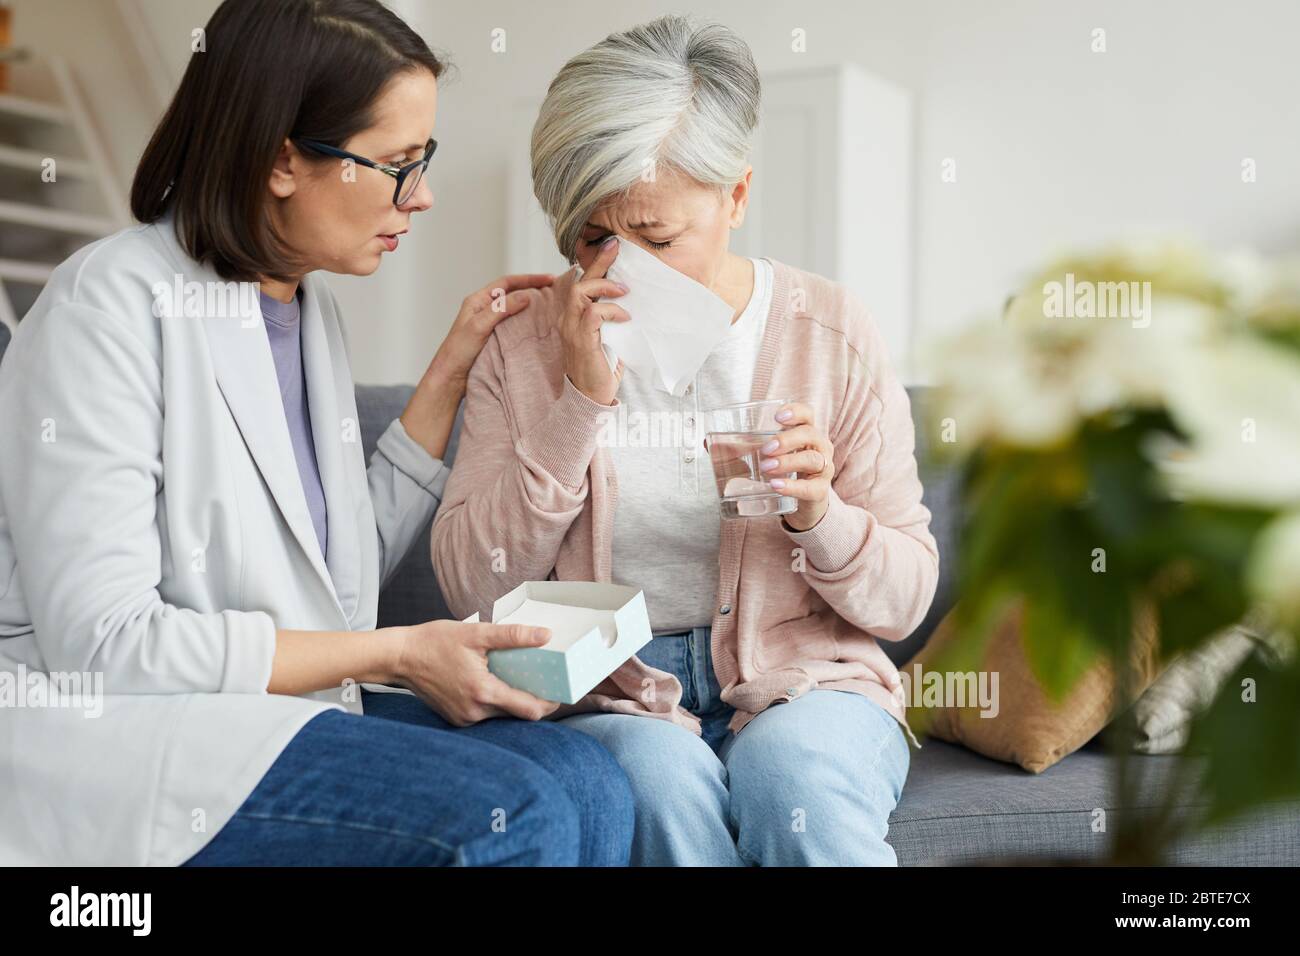 Portrait of adult female psychologist helping crying senior woman during therapy session in office, copy space Stock Photo